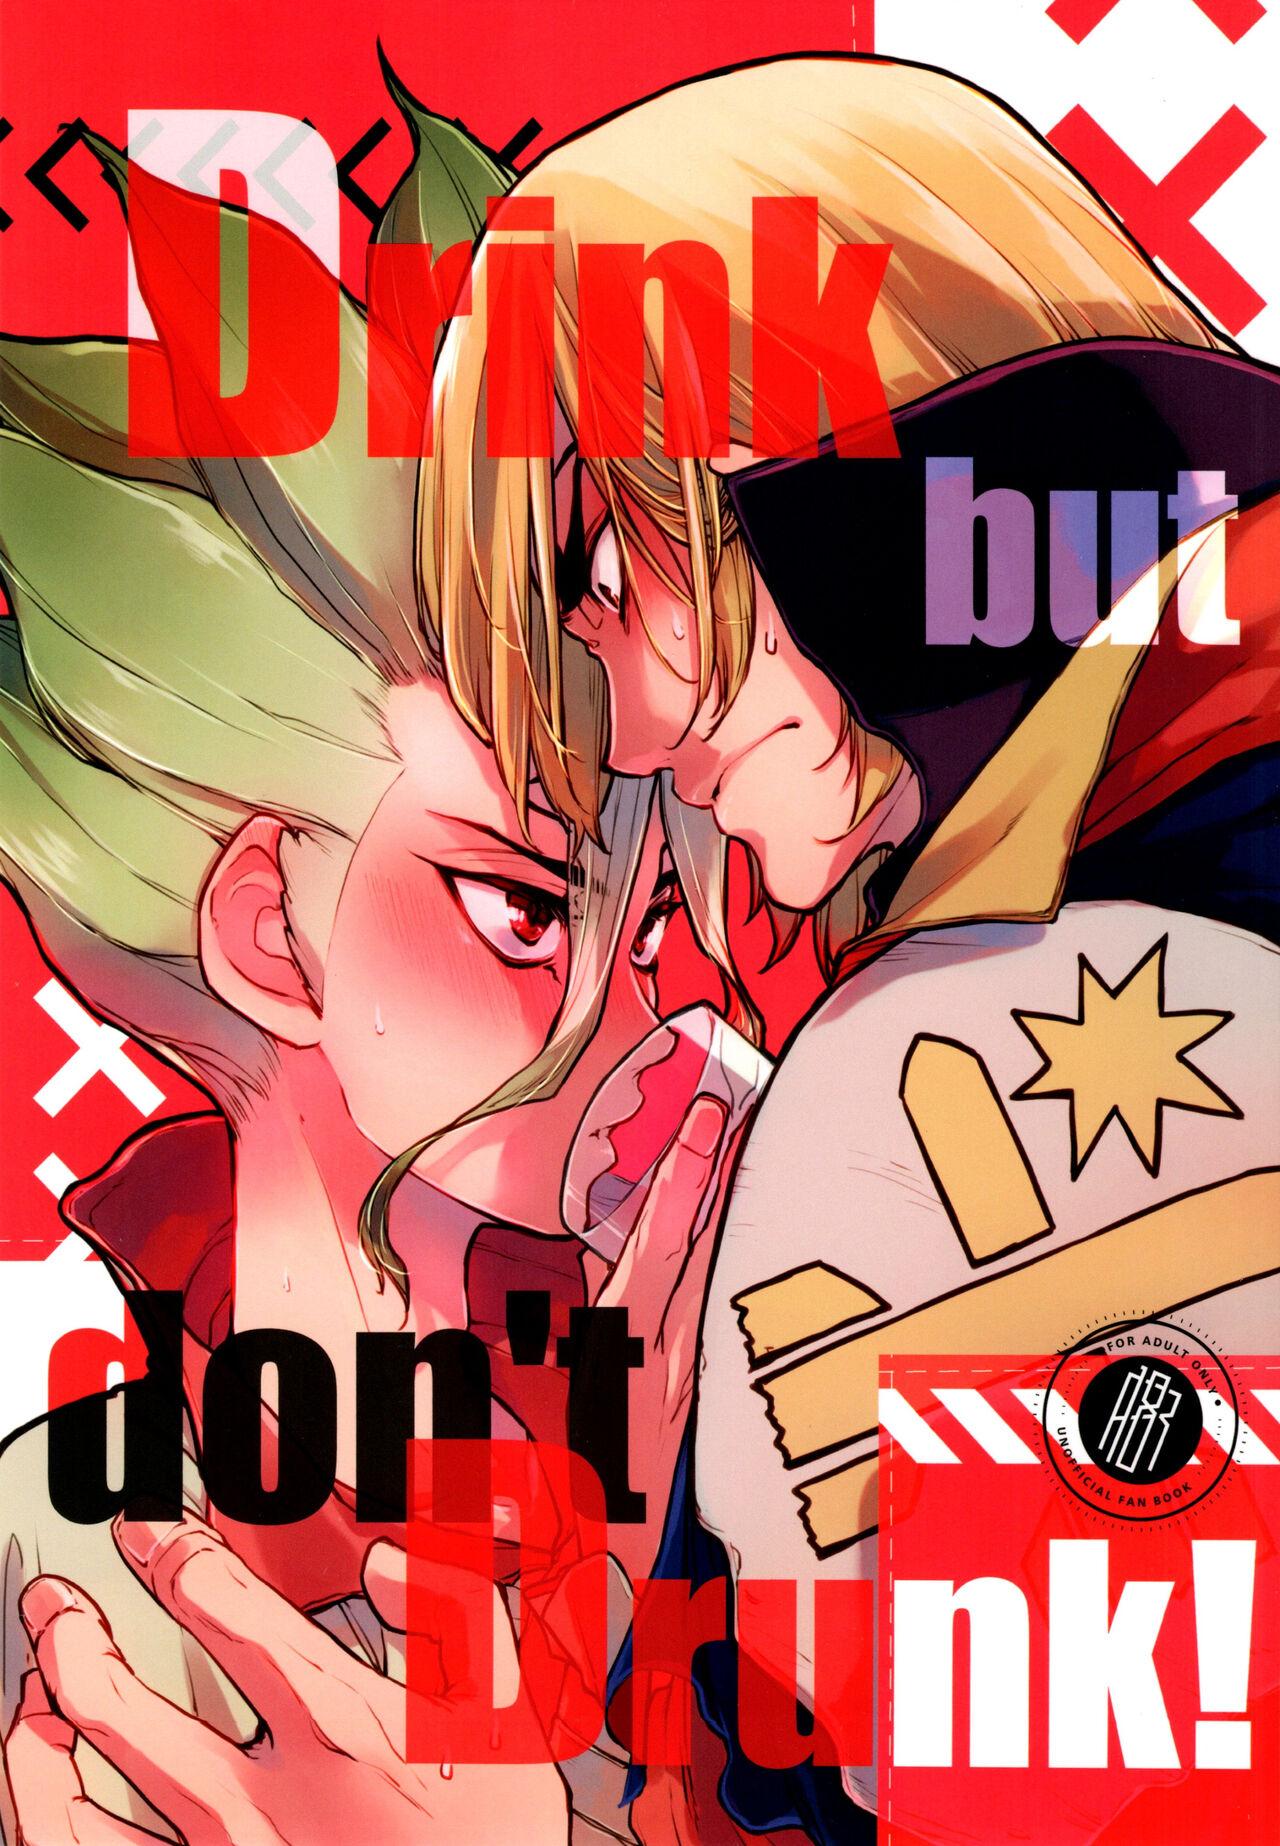 Drink But Don't Drunk! [PinkJunkie (和泉あき)] (Dr.STONE) 0